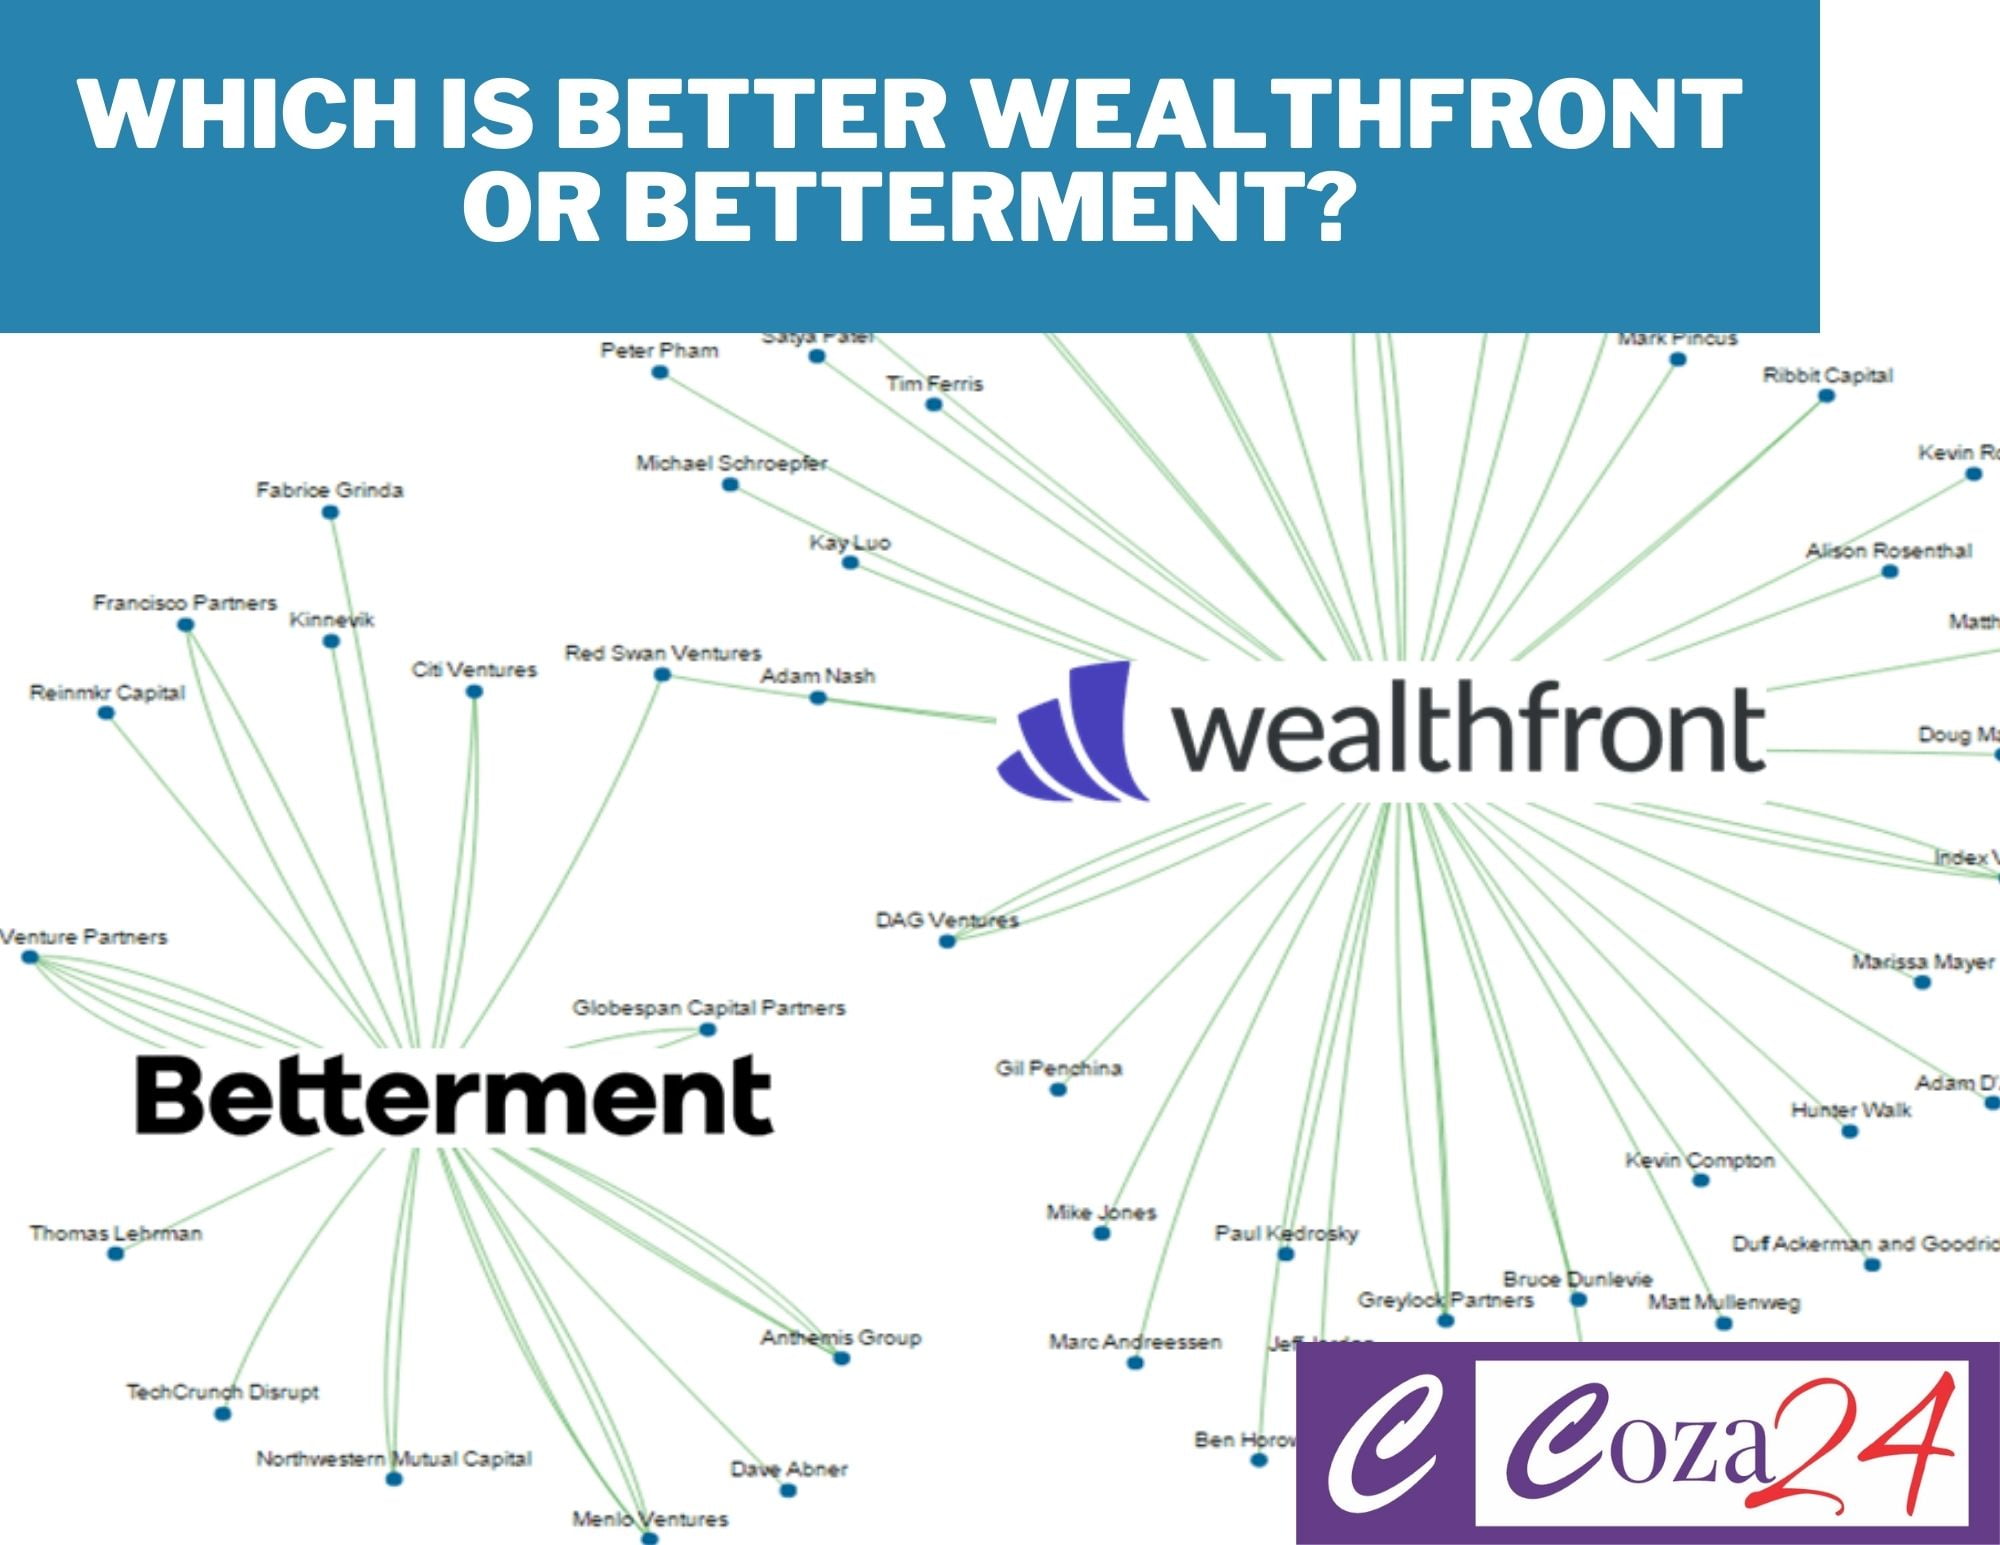 Which is Better Wealthfront or Betterment?